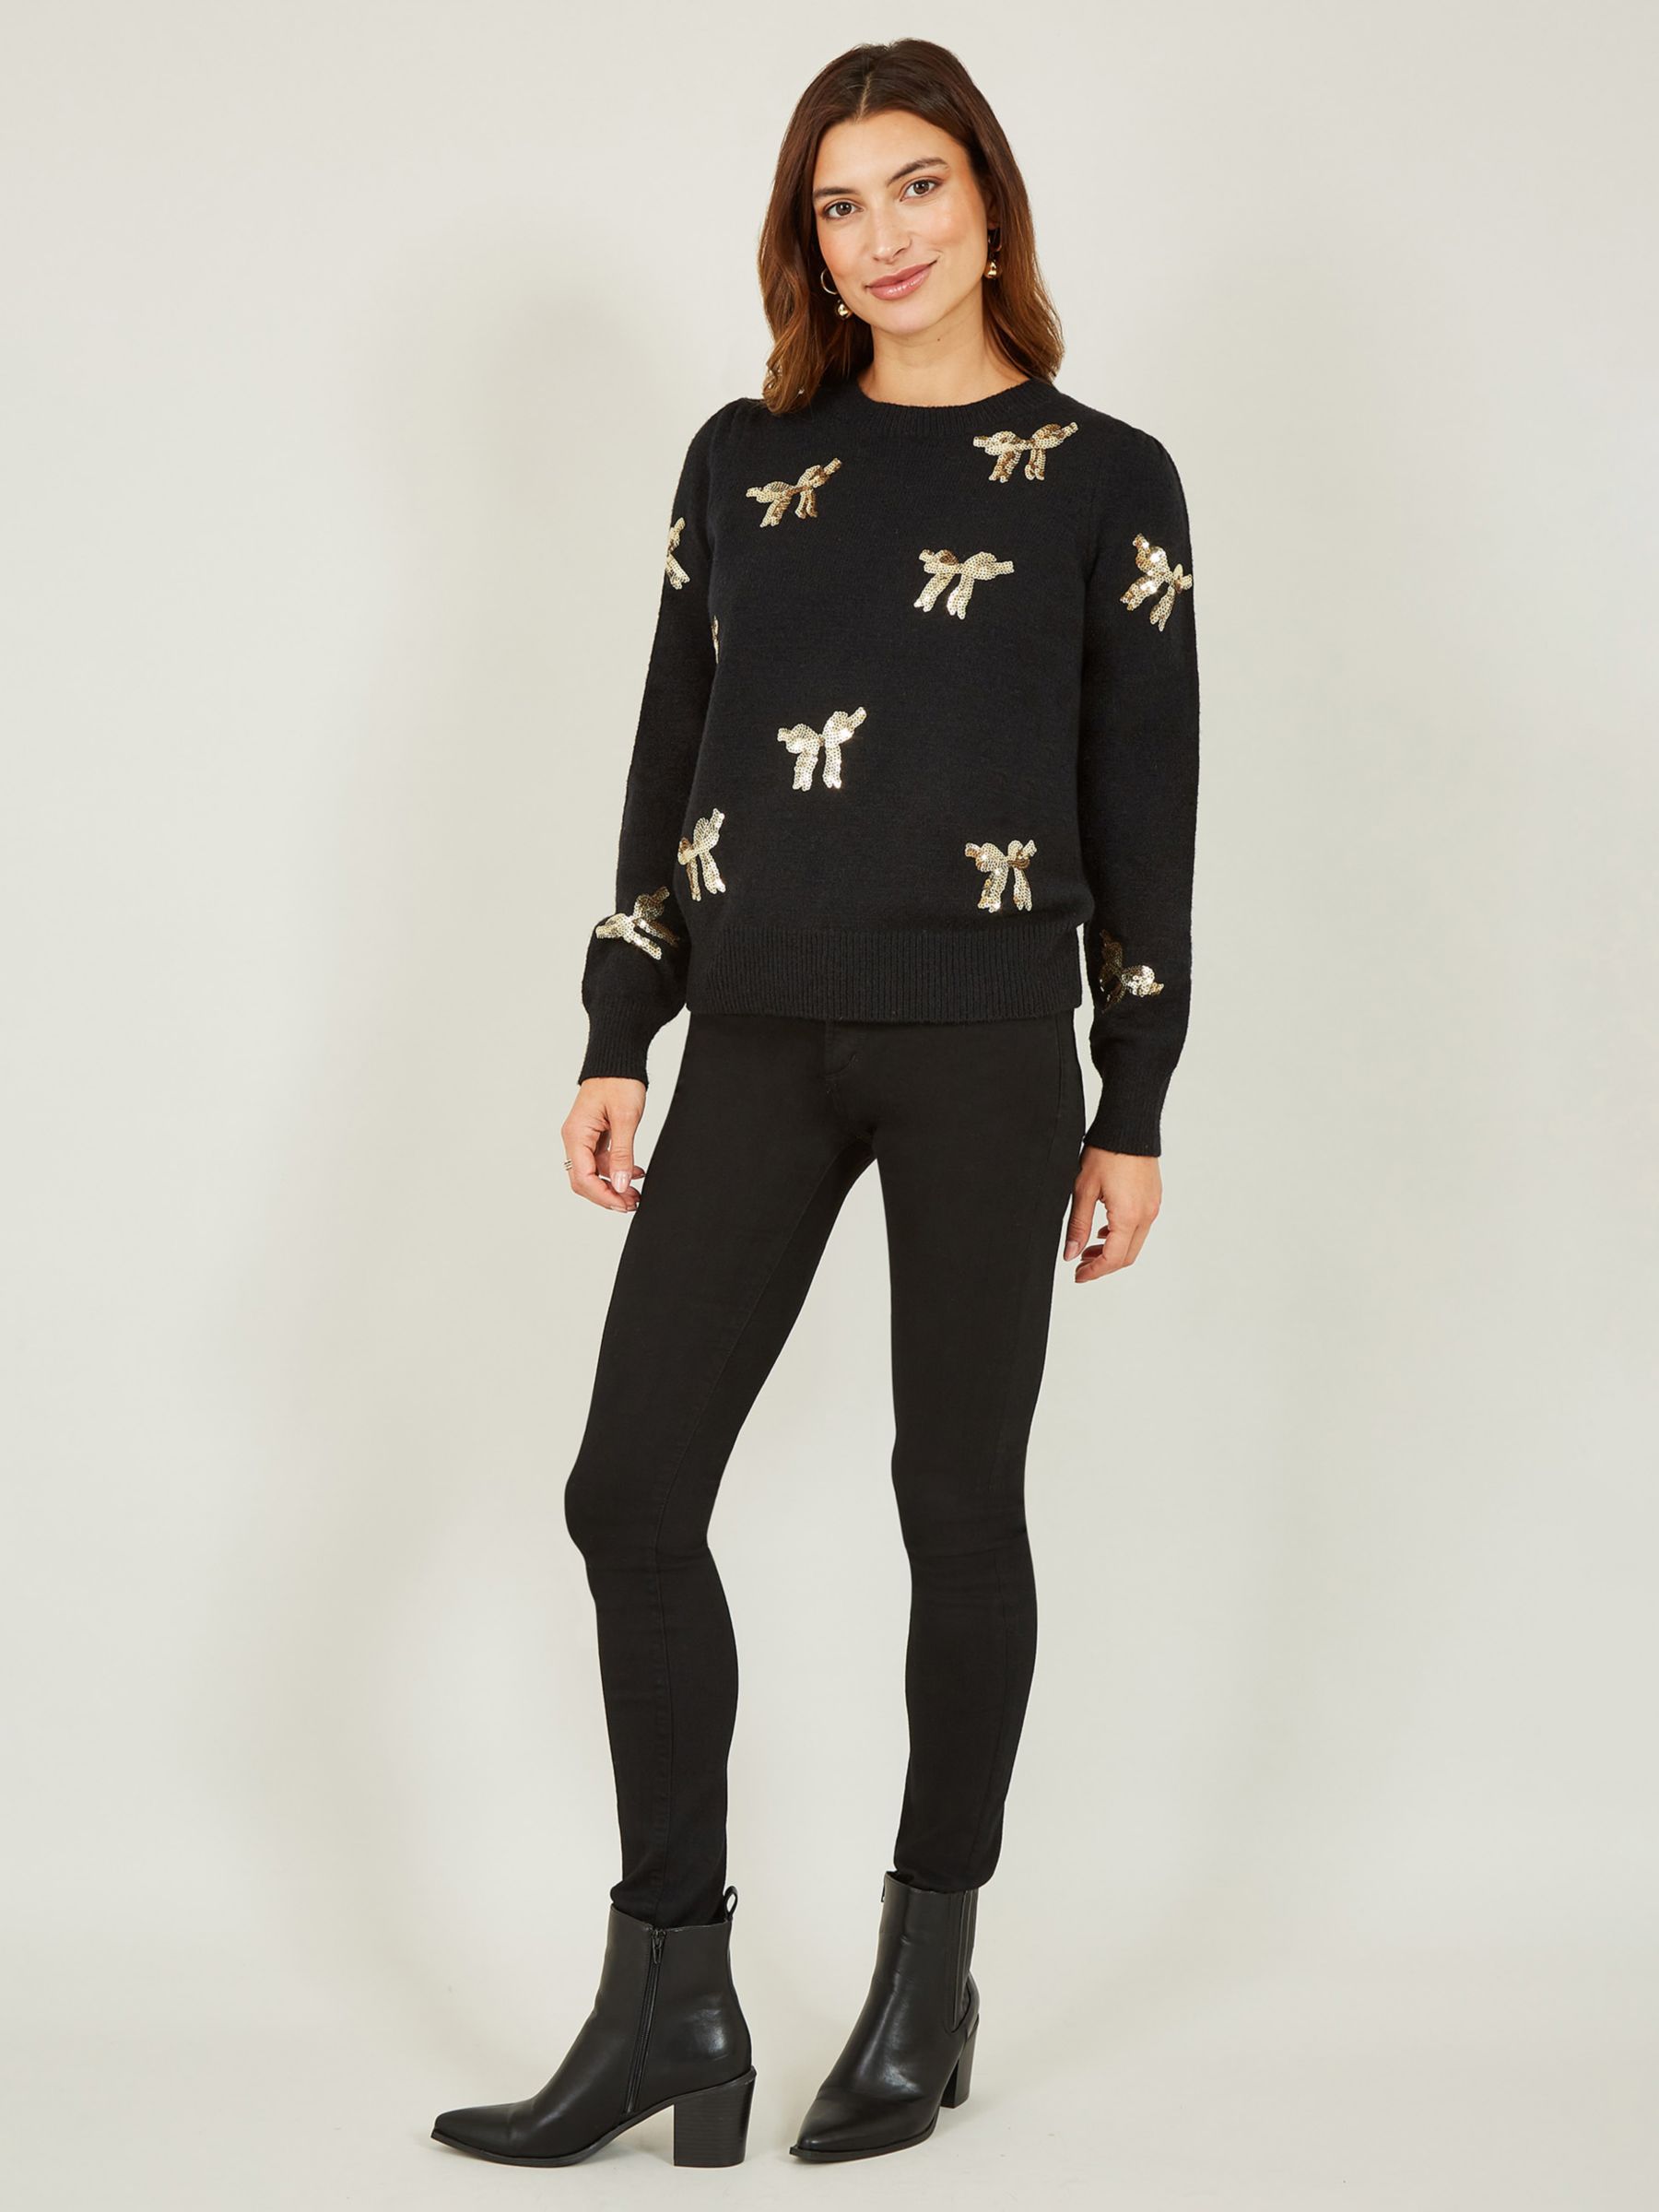 Yumi Sequin Bow Knitted Jumper, Black at John Lewis & Partners